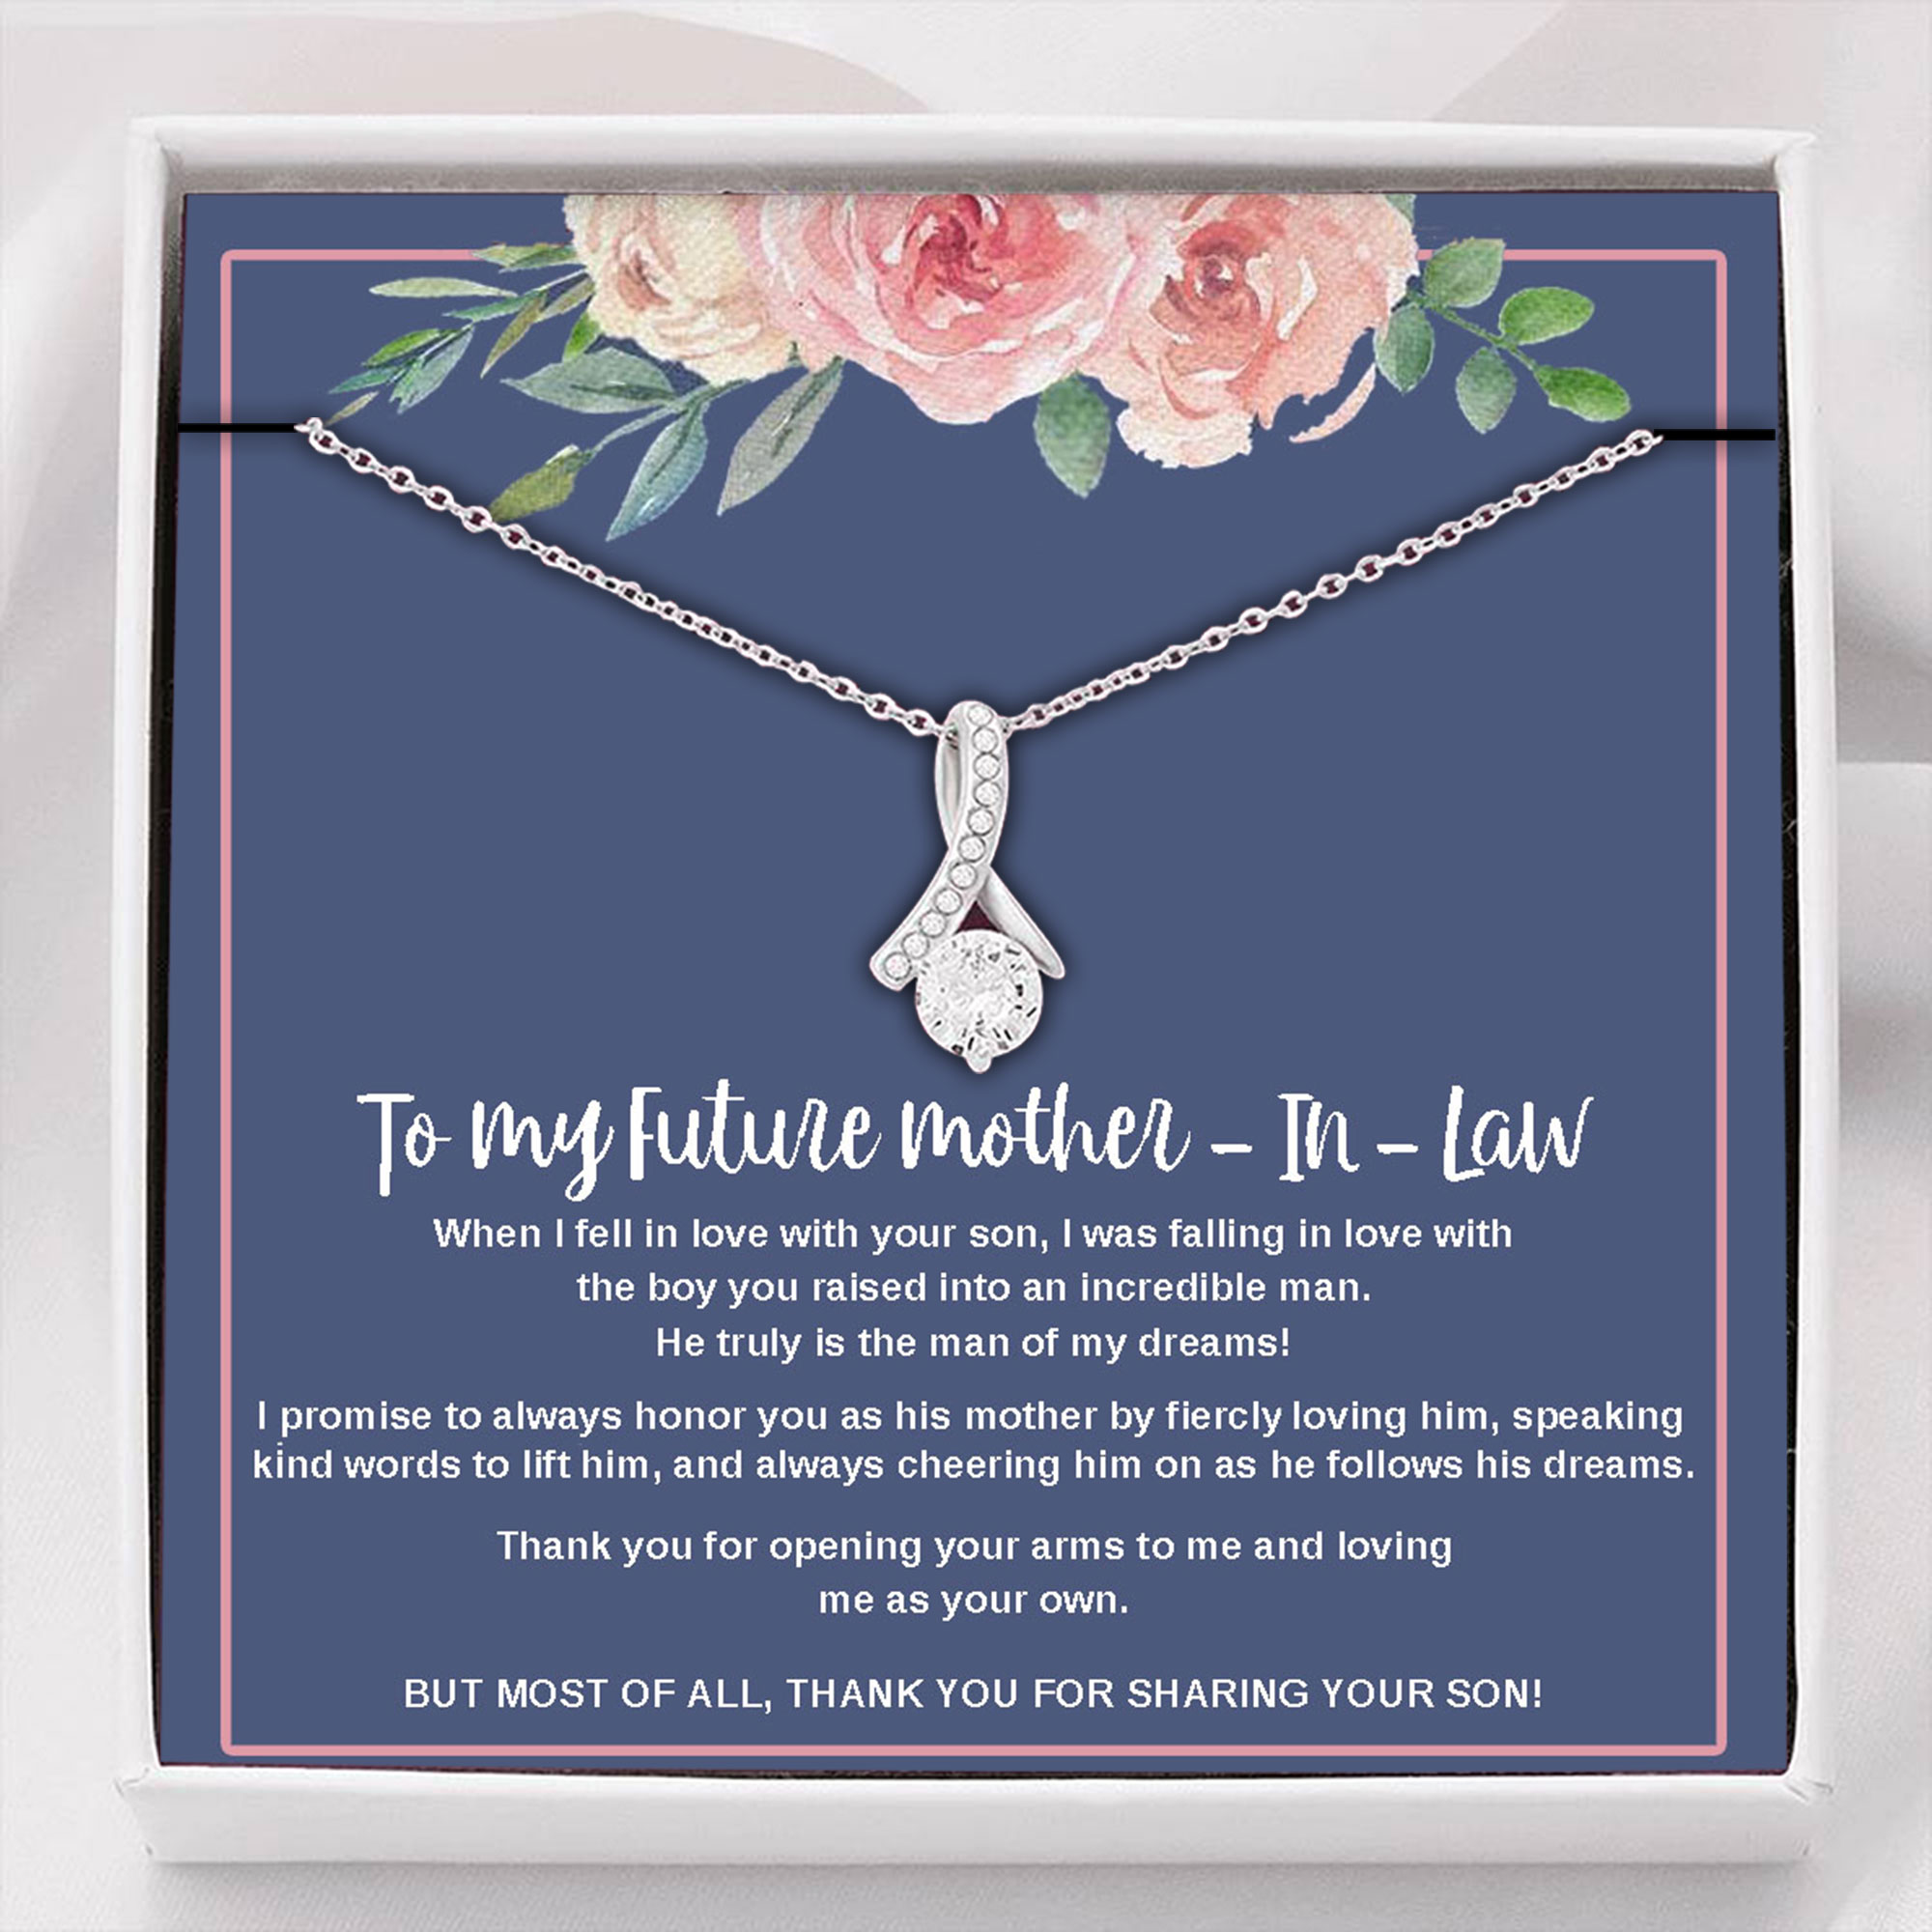 Mom Necklace, Mother-in-law Necklace, Future Mother In Law Necklace Gift, Mother Of The Groom Necklace Wedding